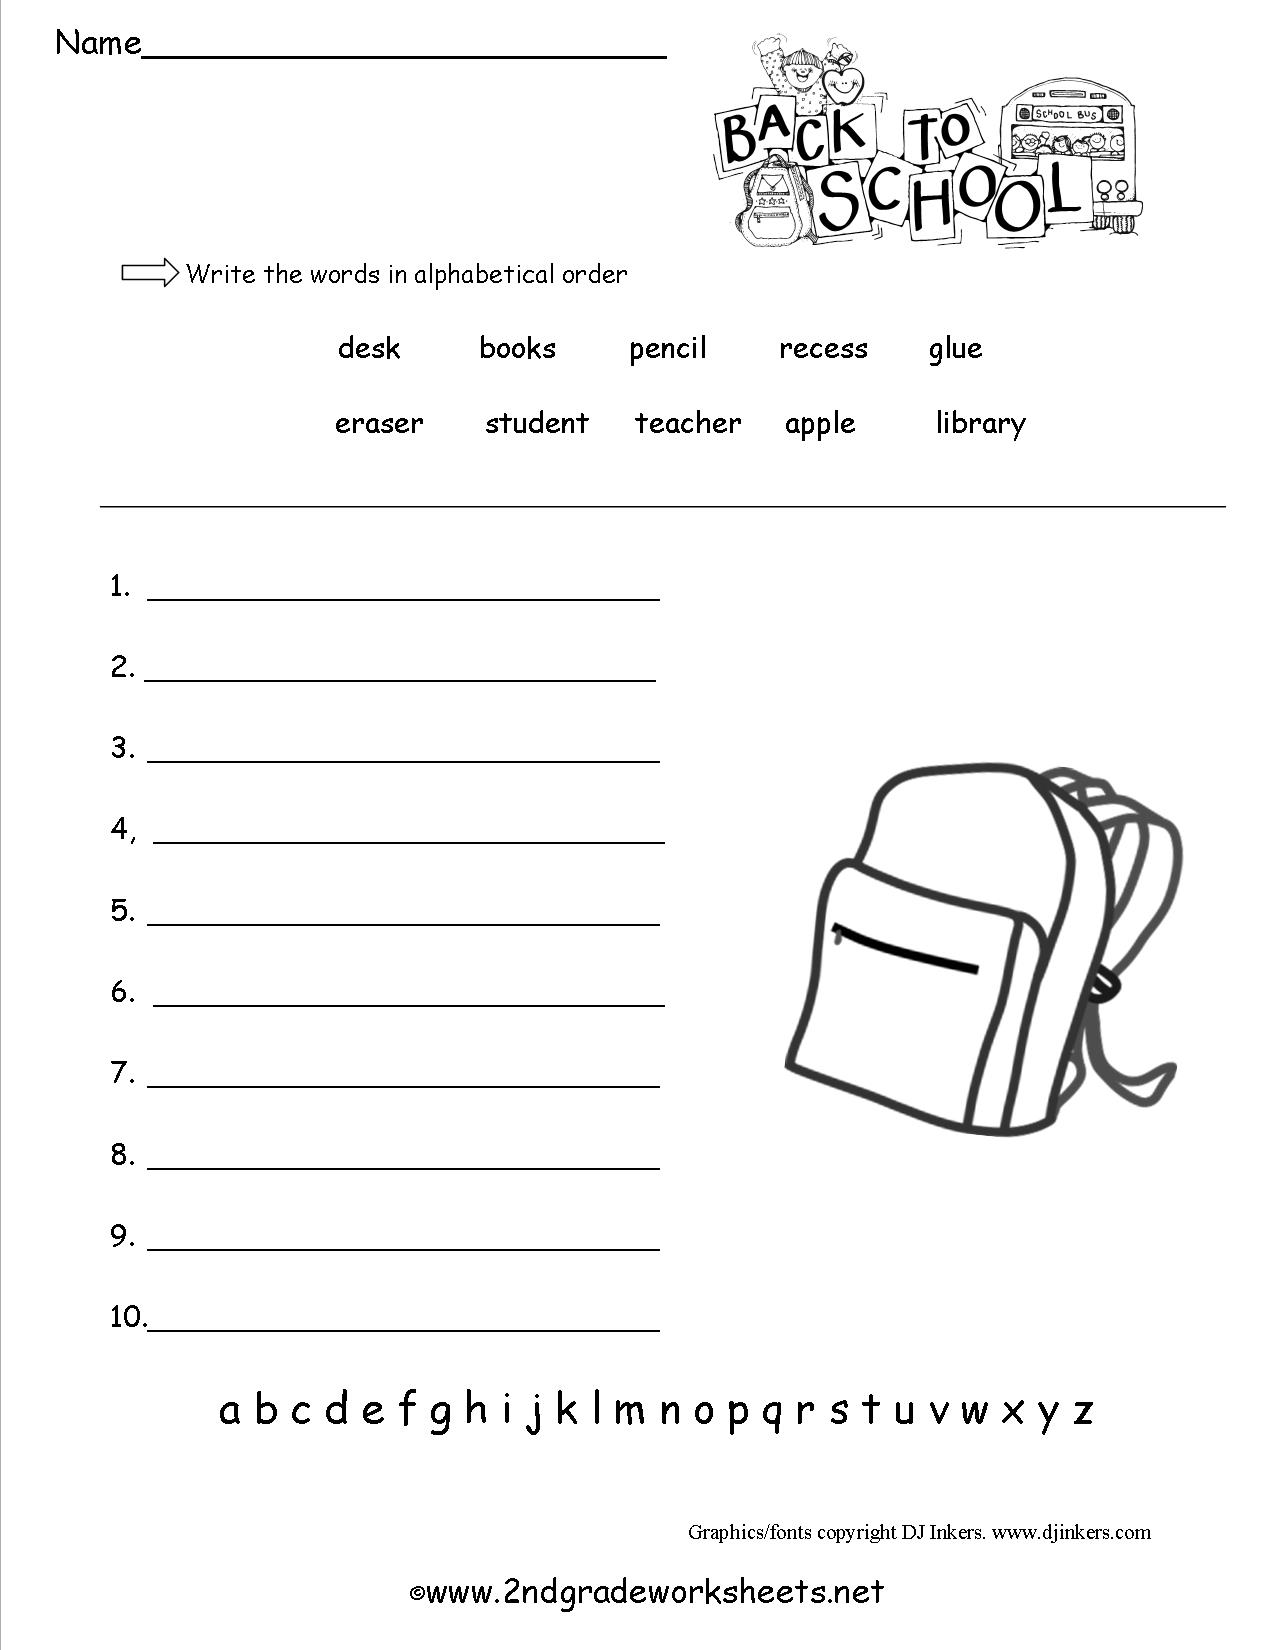 Back to School ABC Order Worksheets Image